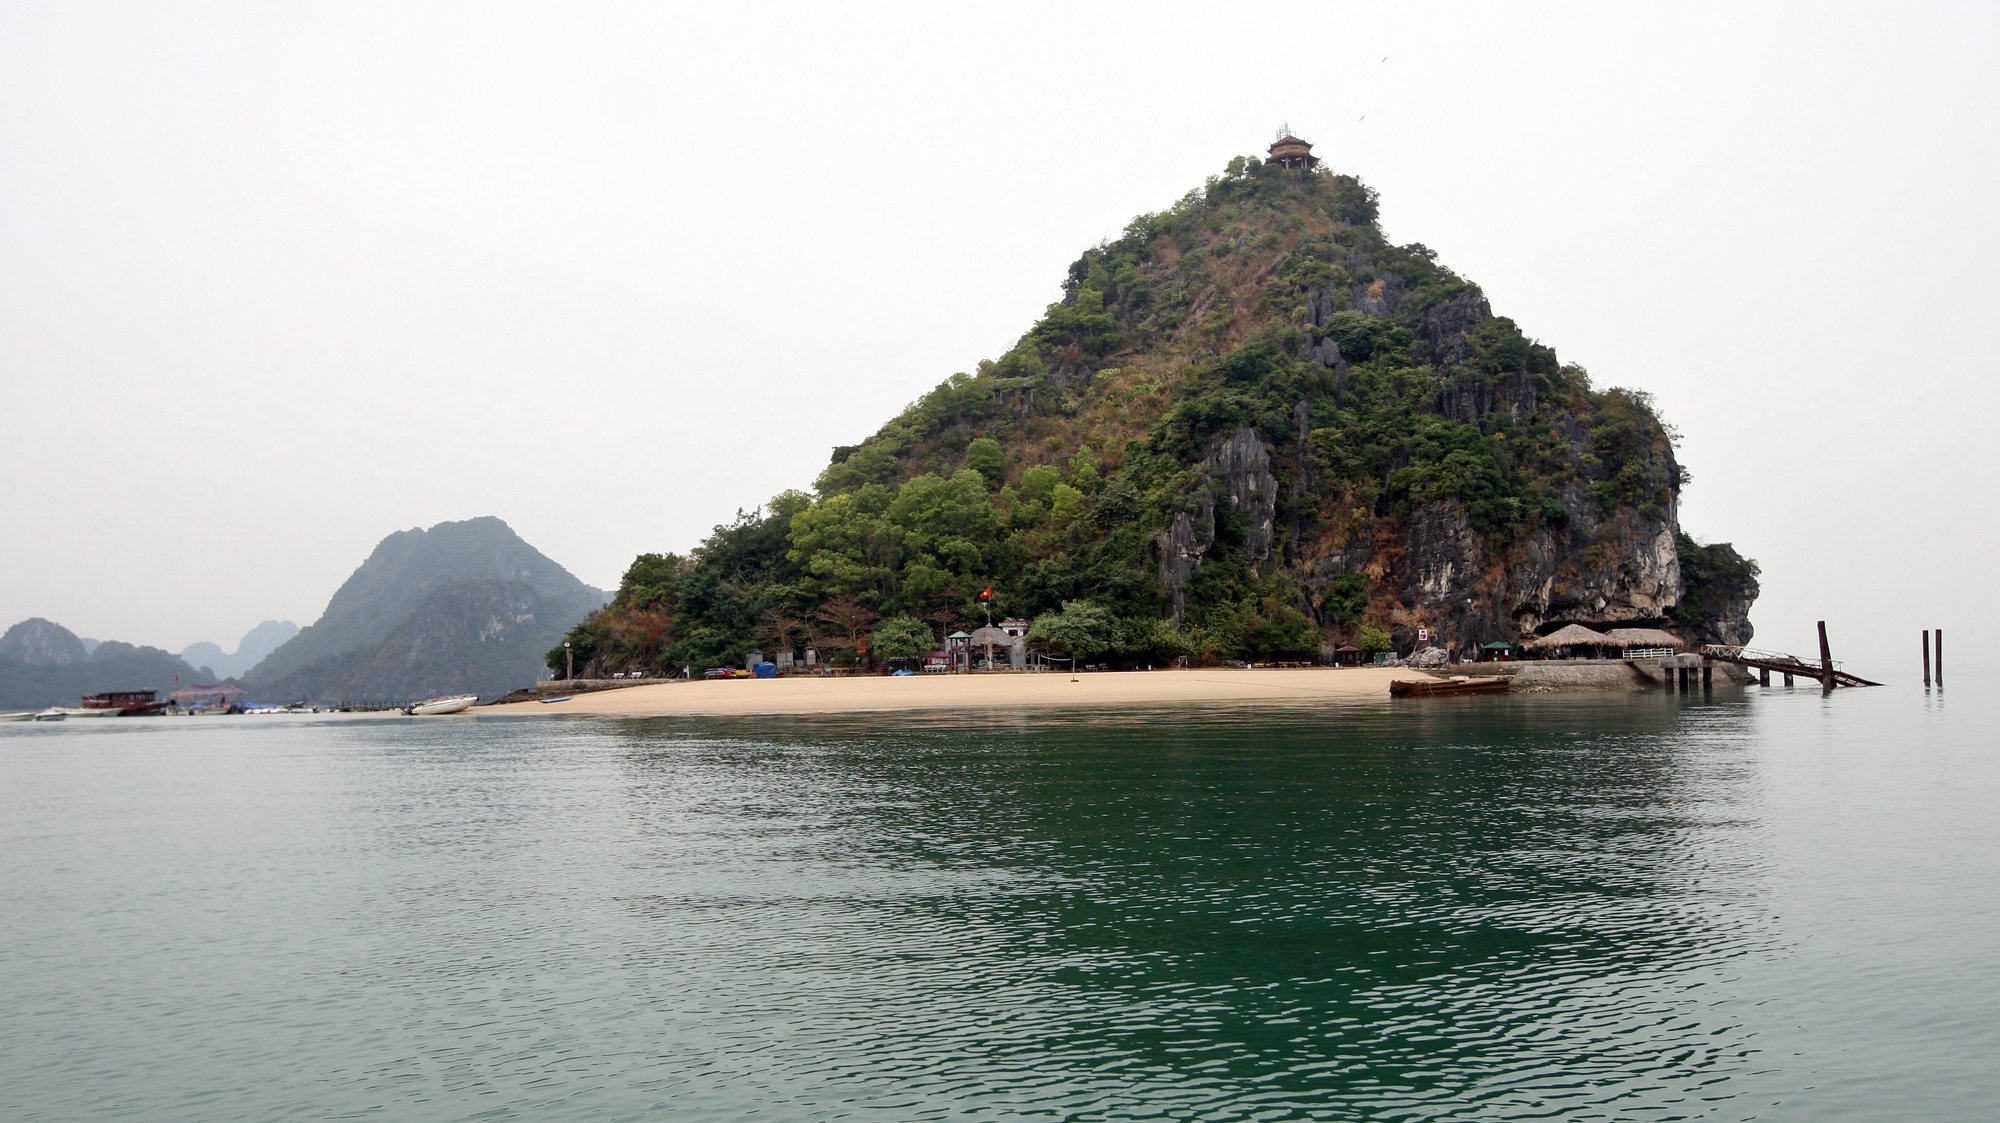 epa02589163 A view of Titop island, where nearby the tourist boat &#039;Dream Voyage&#039; sunk, in Ha Long Bay, in northern Vietnam, 18 February 2011. Vietnamese police detained for questioning the captain and four crew members involved in a boat tragedy that left 12 tourists dead the previous day. The accident occurred on 17 February at Ha Long Bay when a tourist boat carrying 27 people sank. Nguyen Khuong Duy, a Vietnamese Australian, one of 15 survivors in the tragedy told local media the accident happened when people were still sleeping in the boat. Those on the top deck had time to escape before the boat sank.  EPA/LUONG THAI LINH